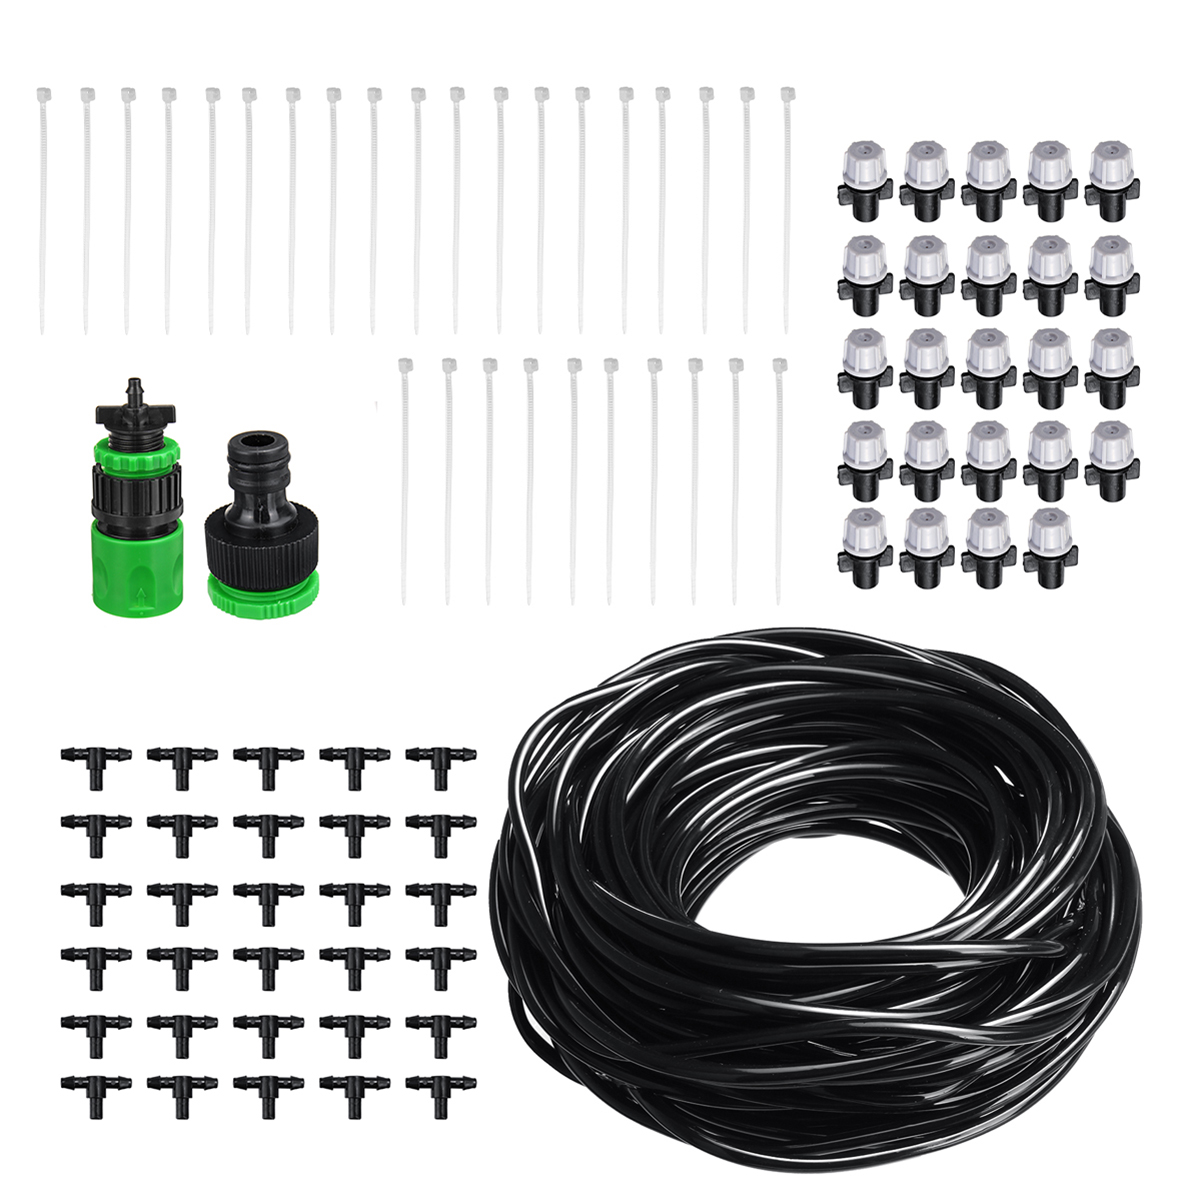 

25m DIY Plant Self Watering Micro Drip Irrigation System Garden Hose Kits with Adjustable Dripper